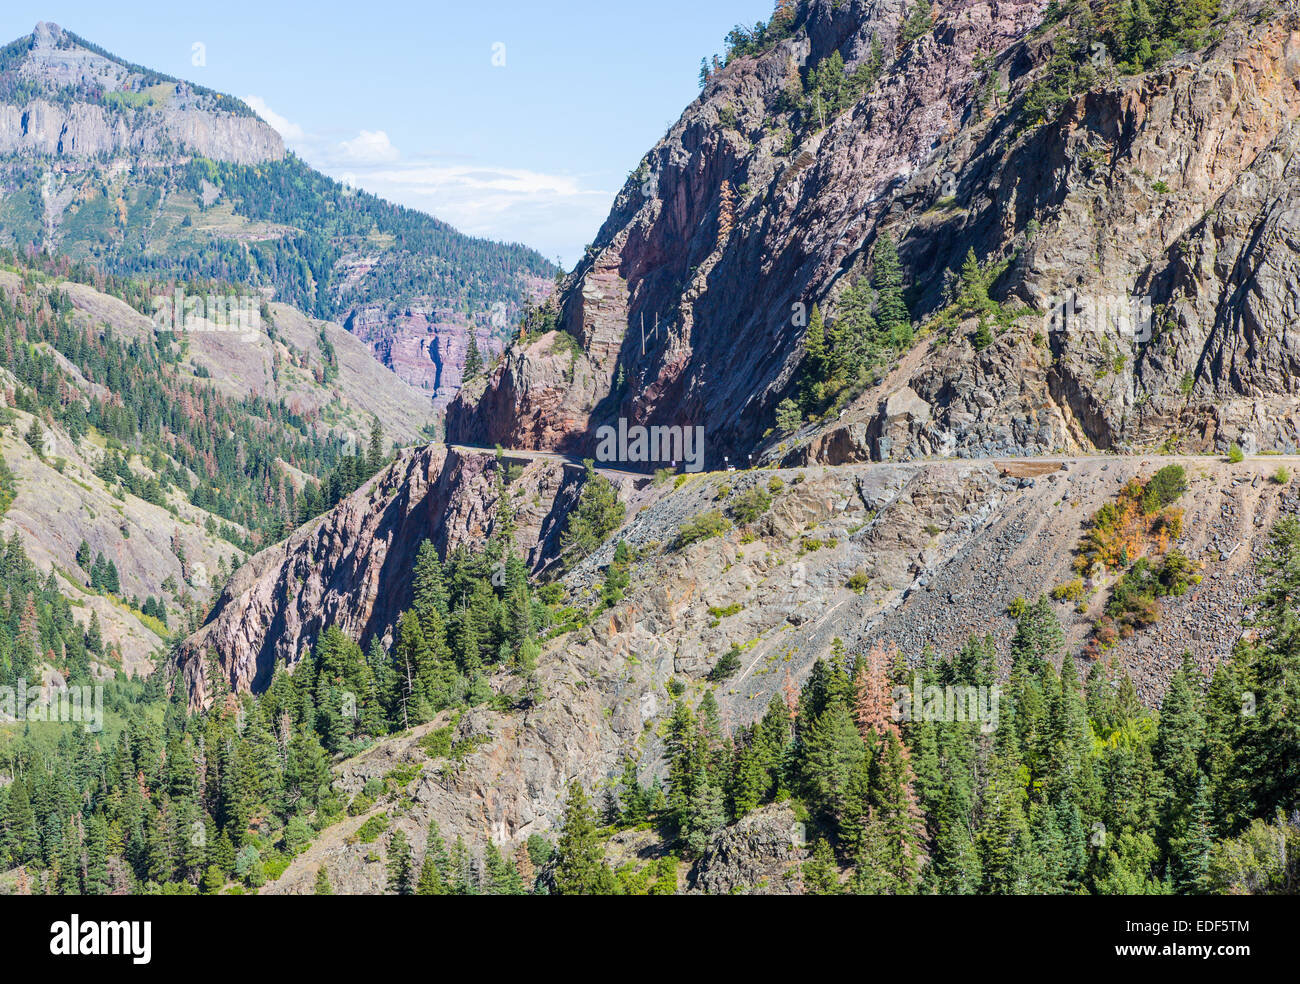 Route 550 San Juan Skyway Scenic Byway also known as Million Dollar Highway between Ouray and Silverton in Colorado Stock Photo